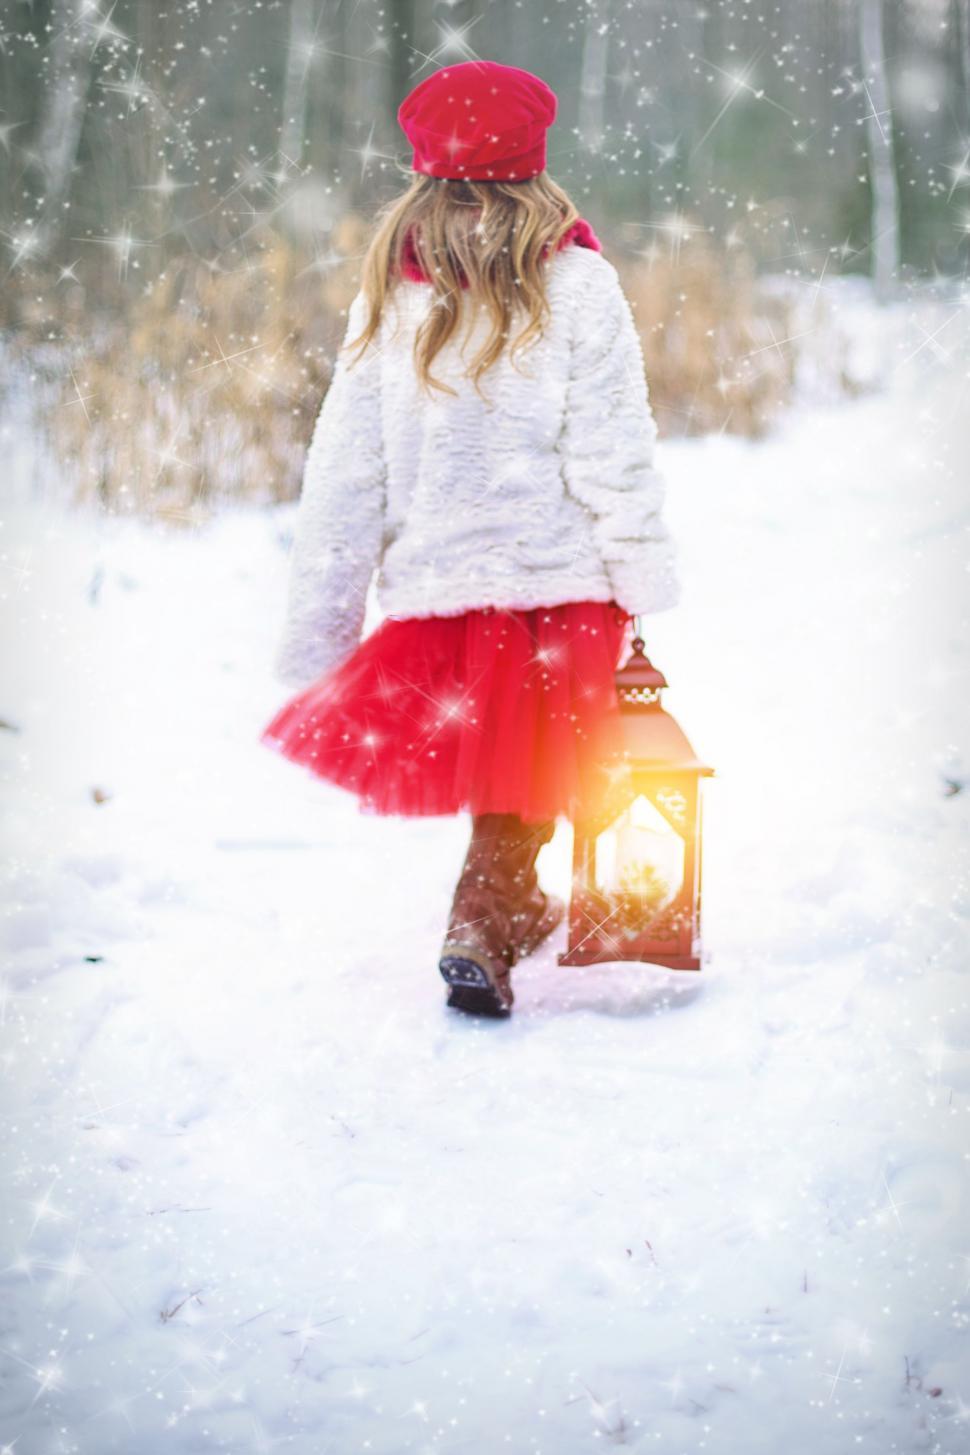 Free Image of Little Girl With Lantern in Snow 